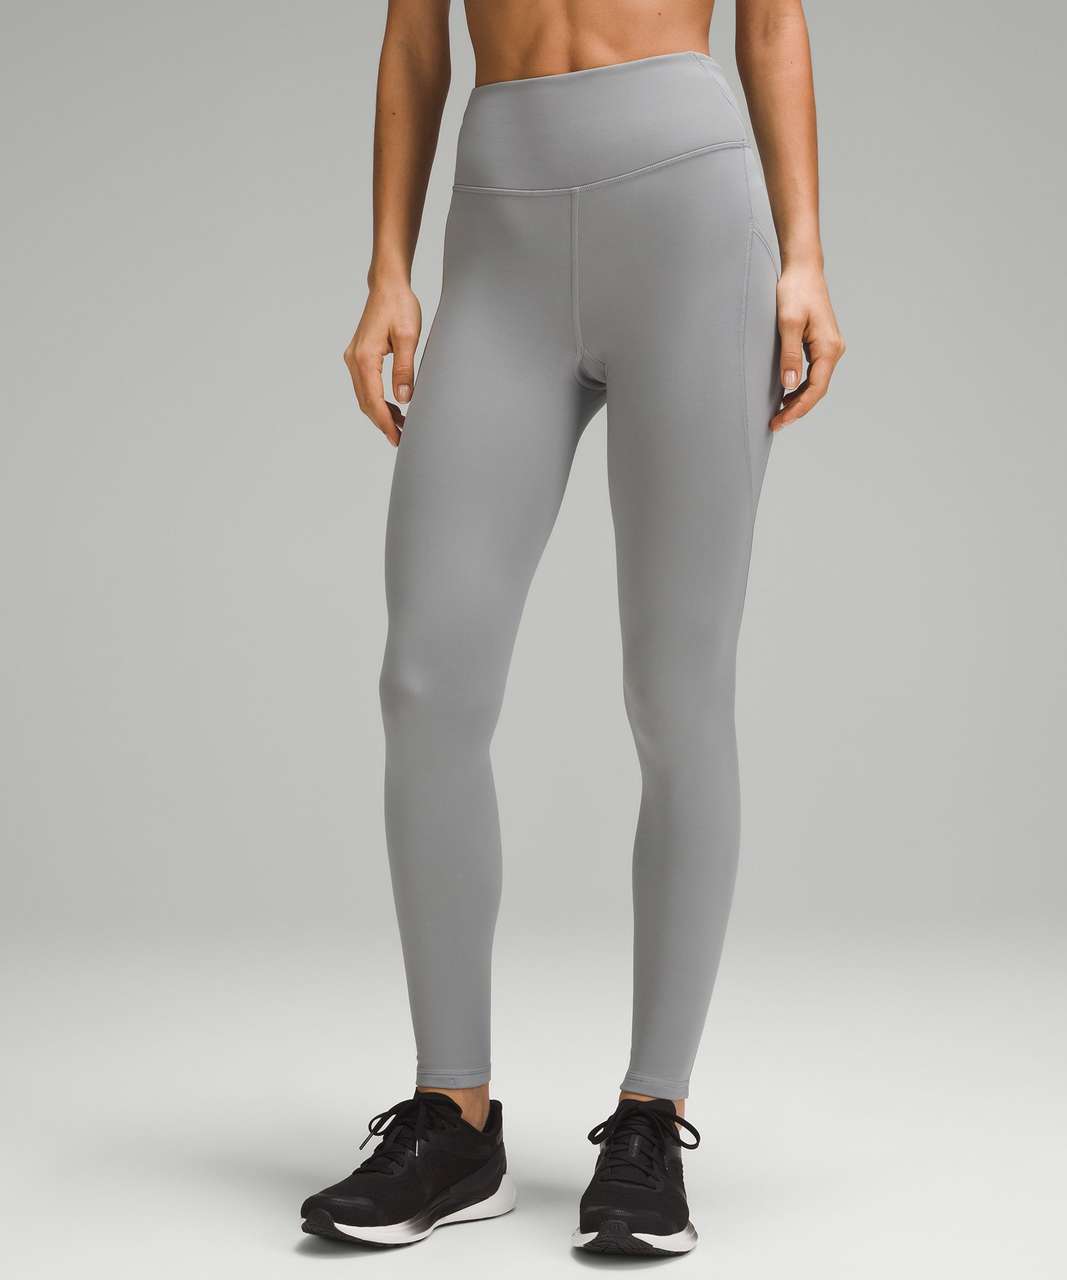 Lululemon Fast and Free High-Rise Fleece Tight 28 *Pockets